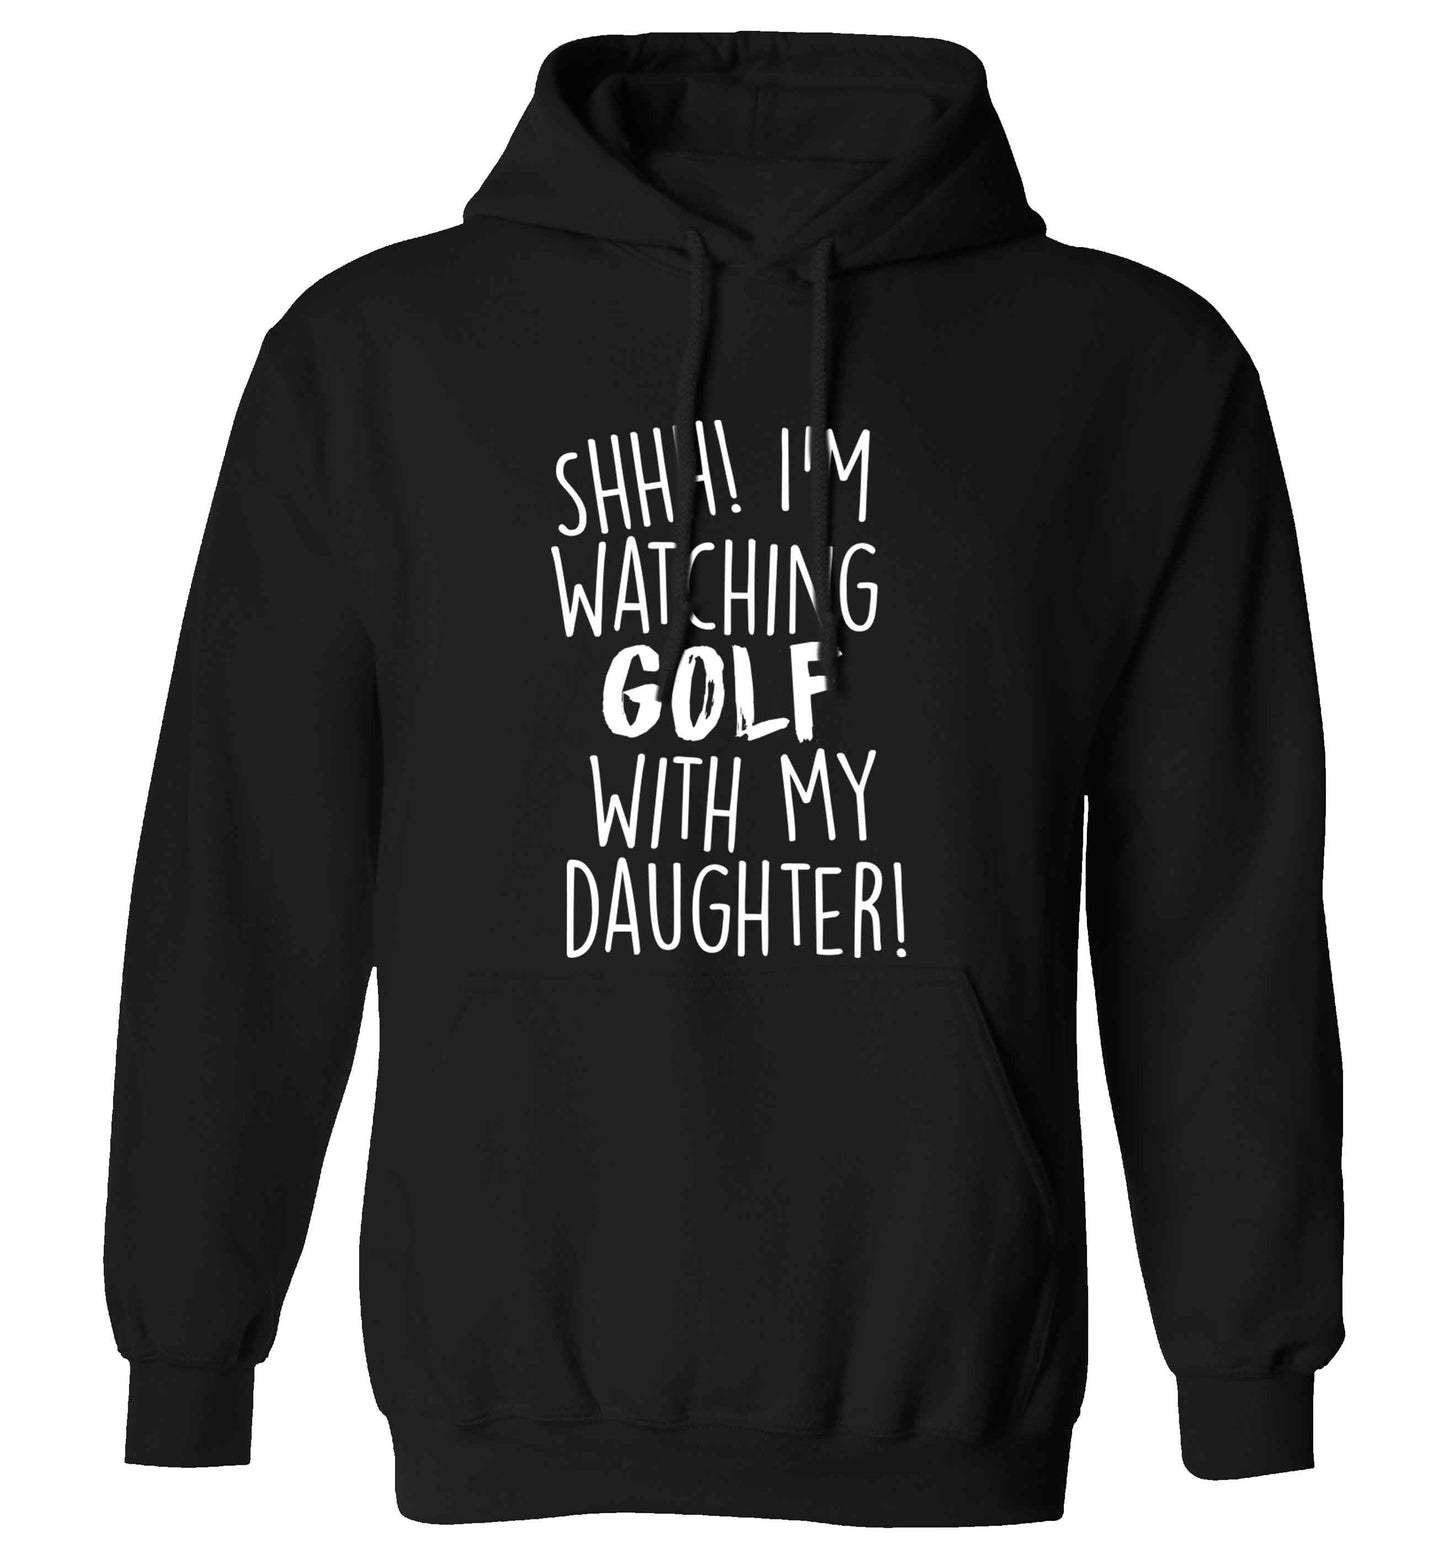 Shh I'm watching golf with my daughter adults unisex black hoodie 2XL